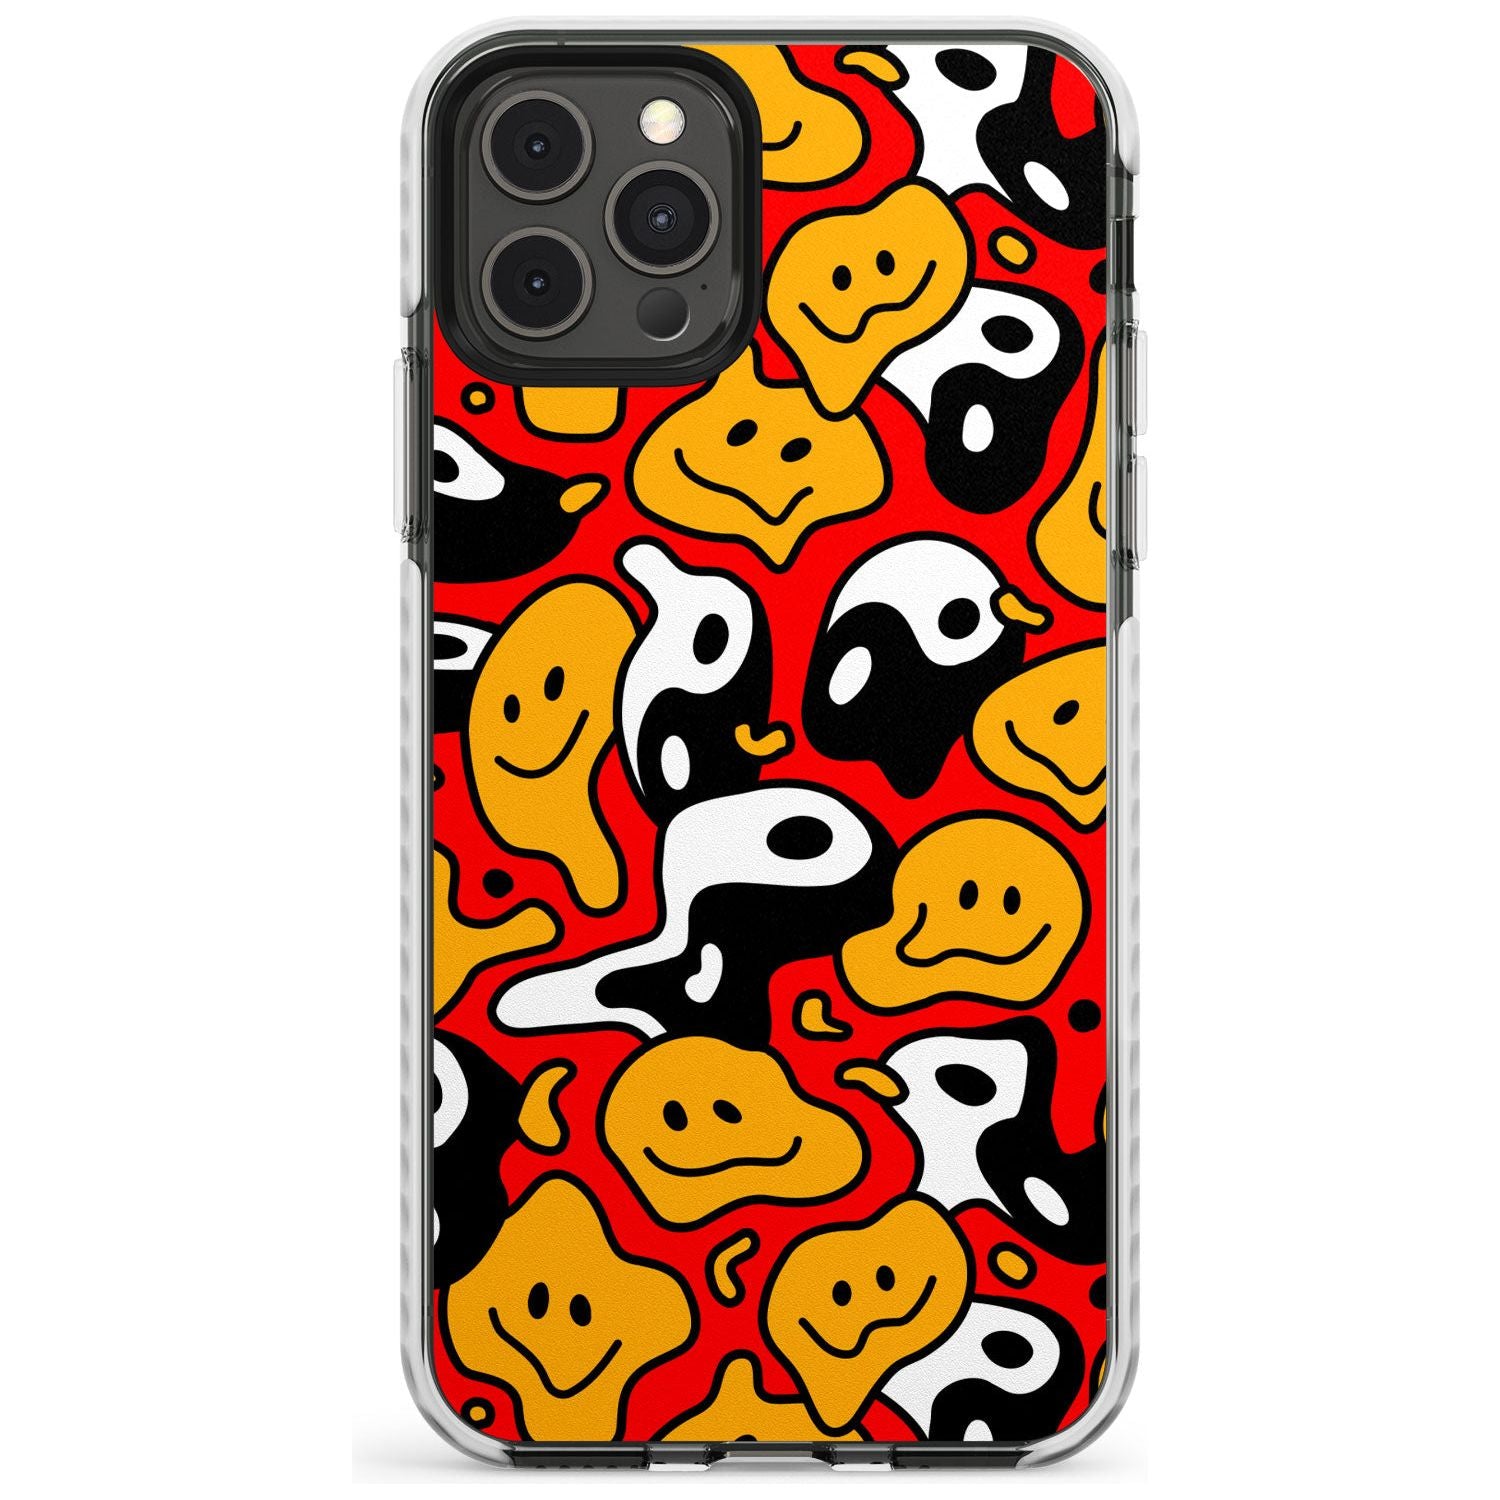 Yin Yang Acid Face Impact Phone Case for iPhone 11 Pro Max